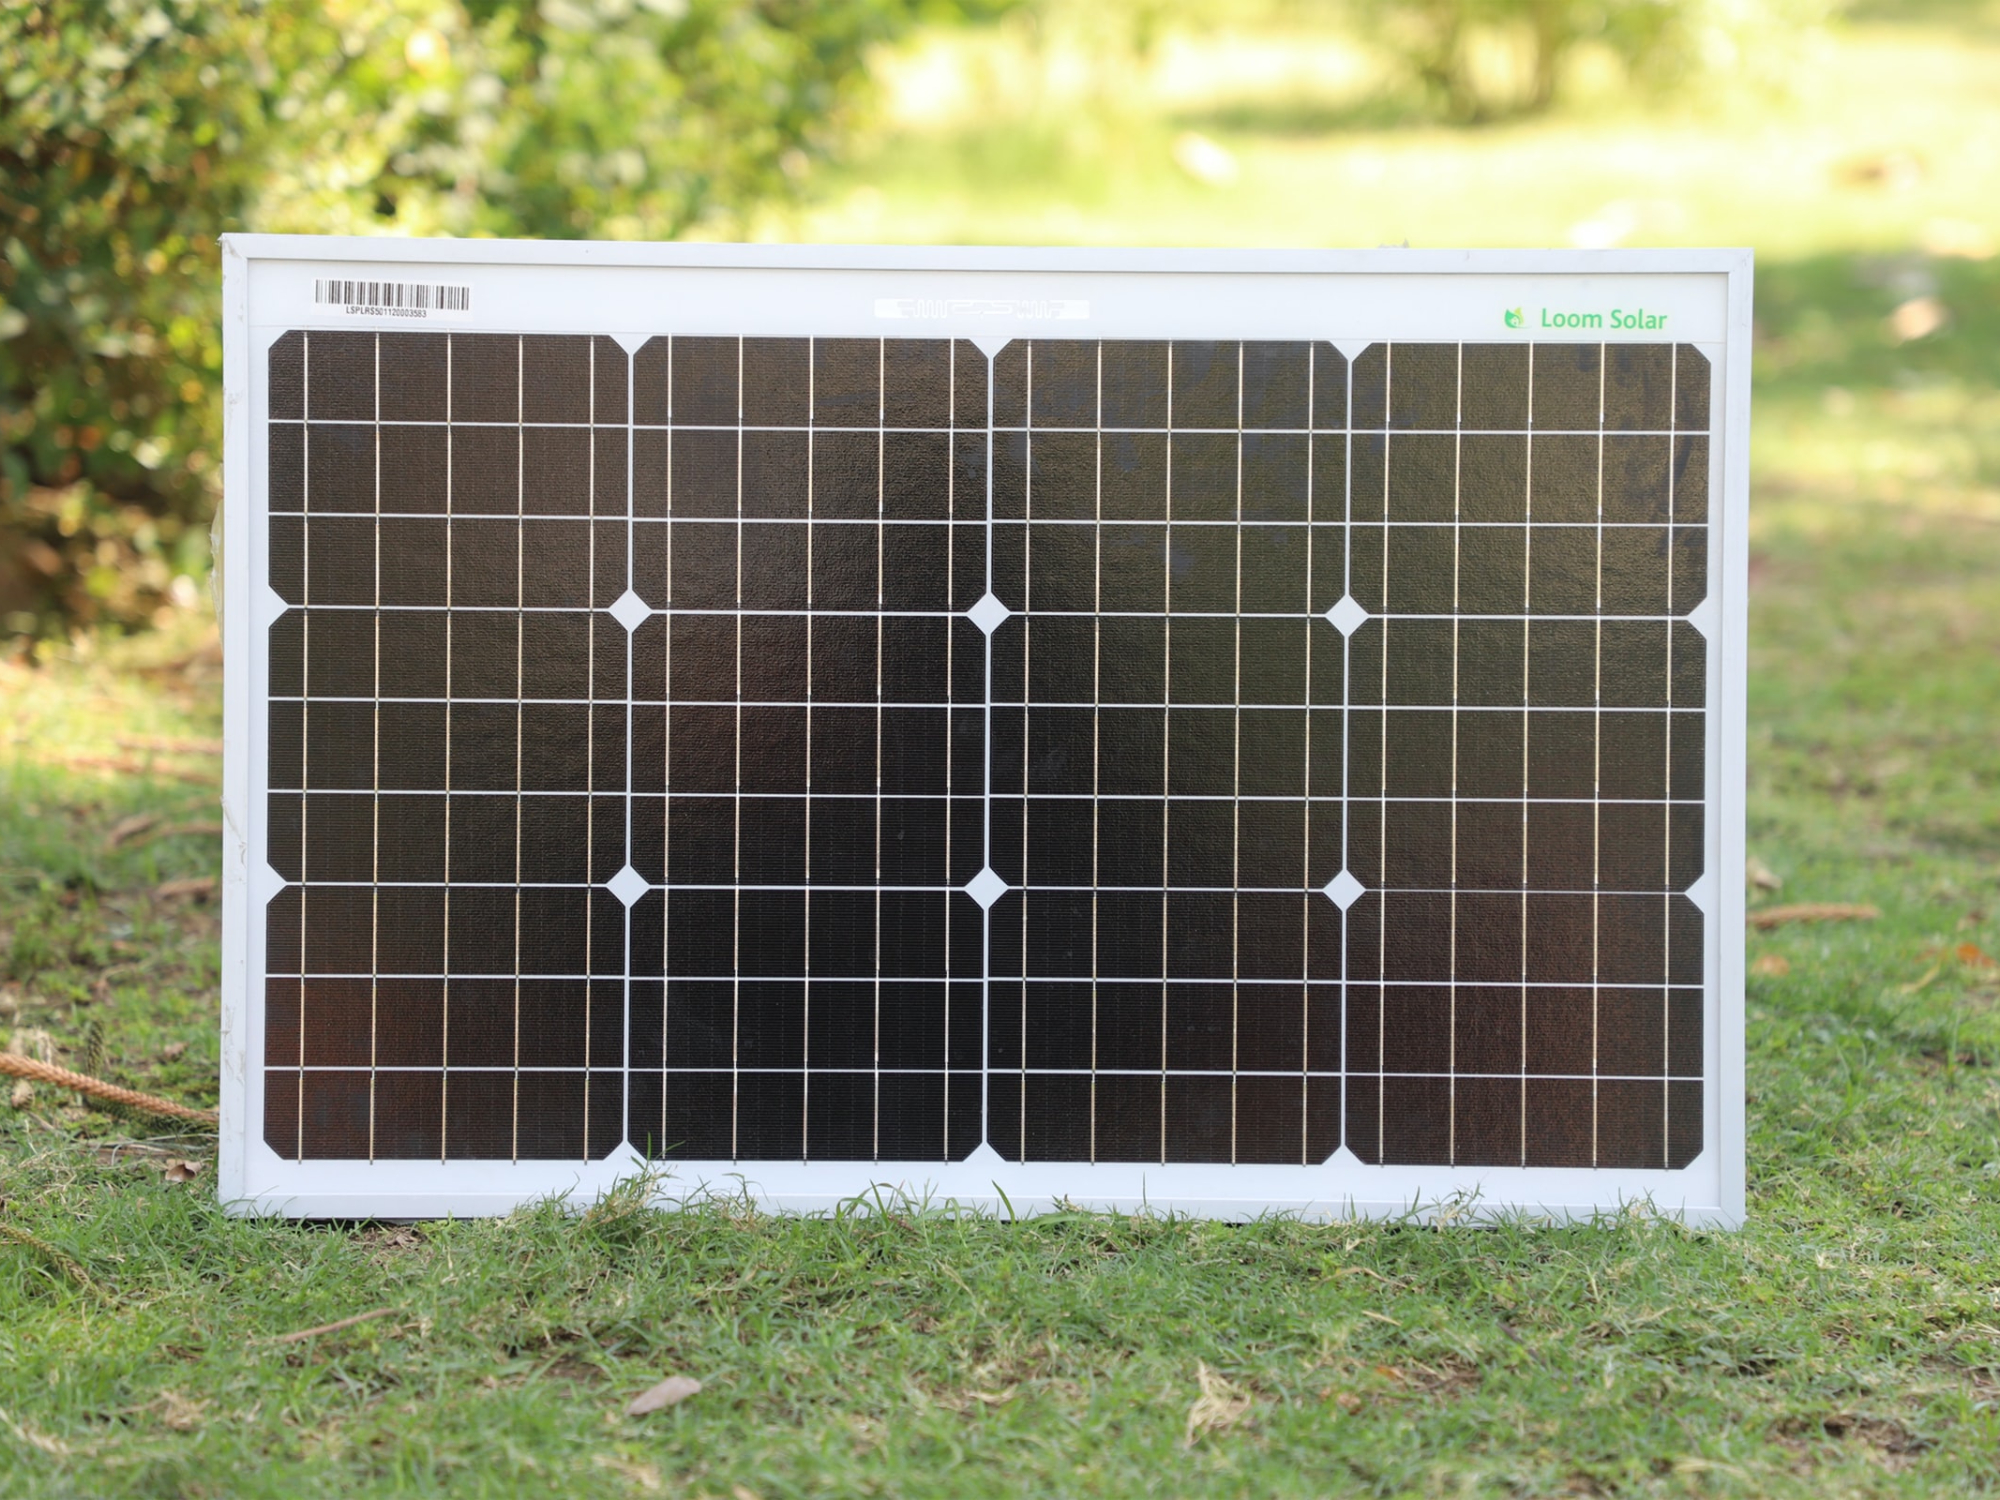 A small, portable solar panel for charging your devices.